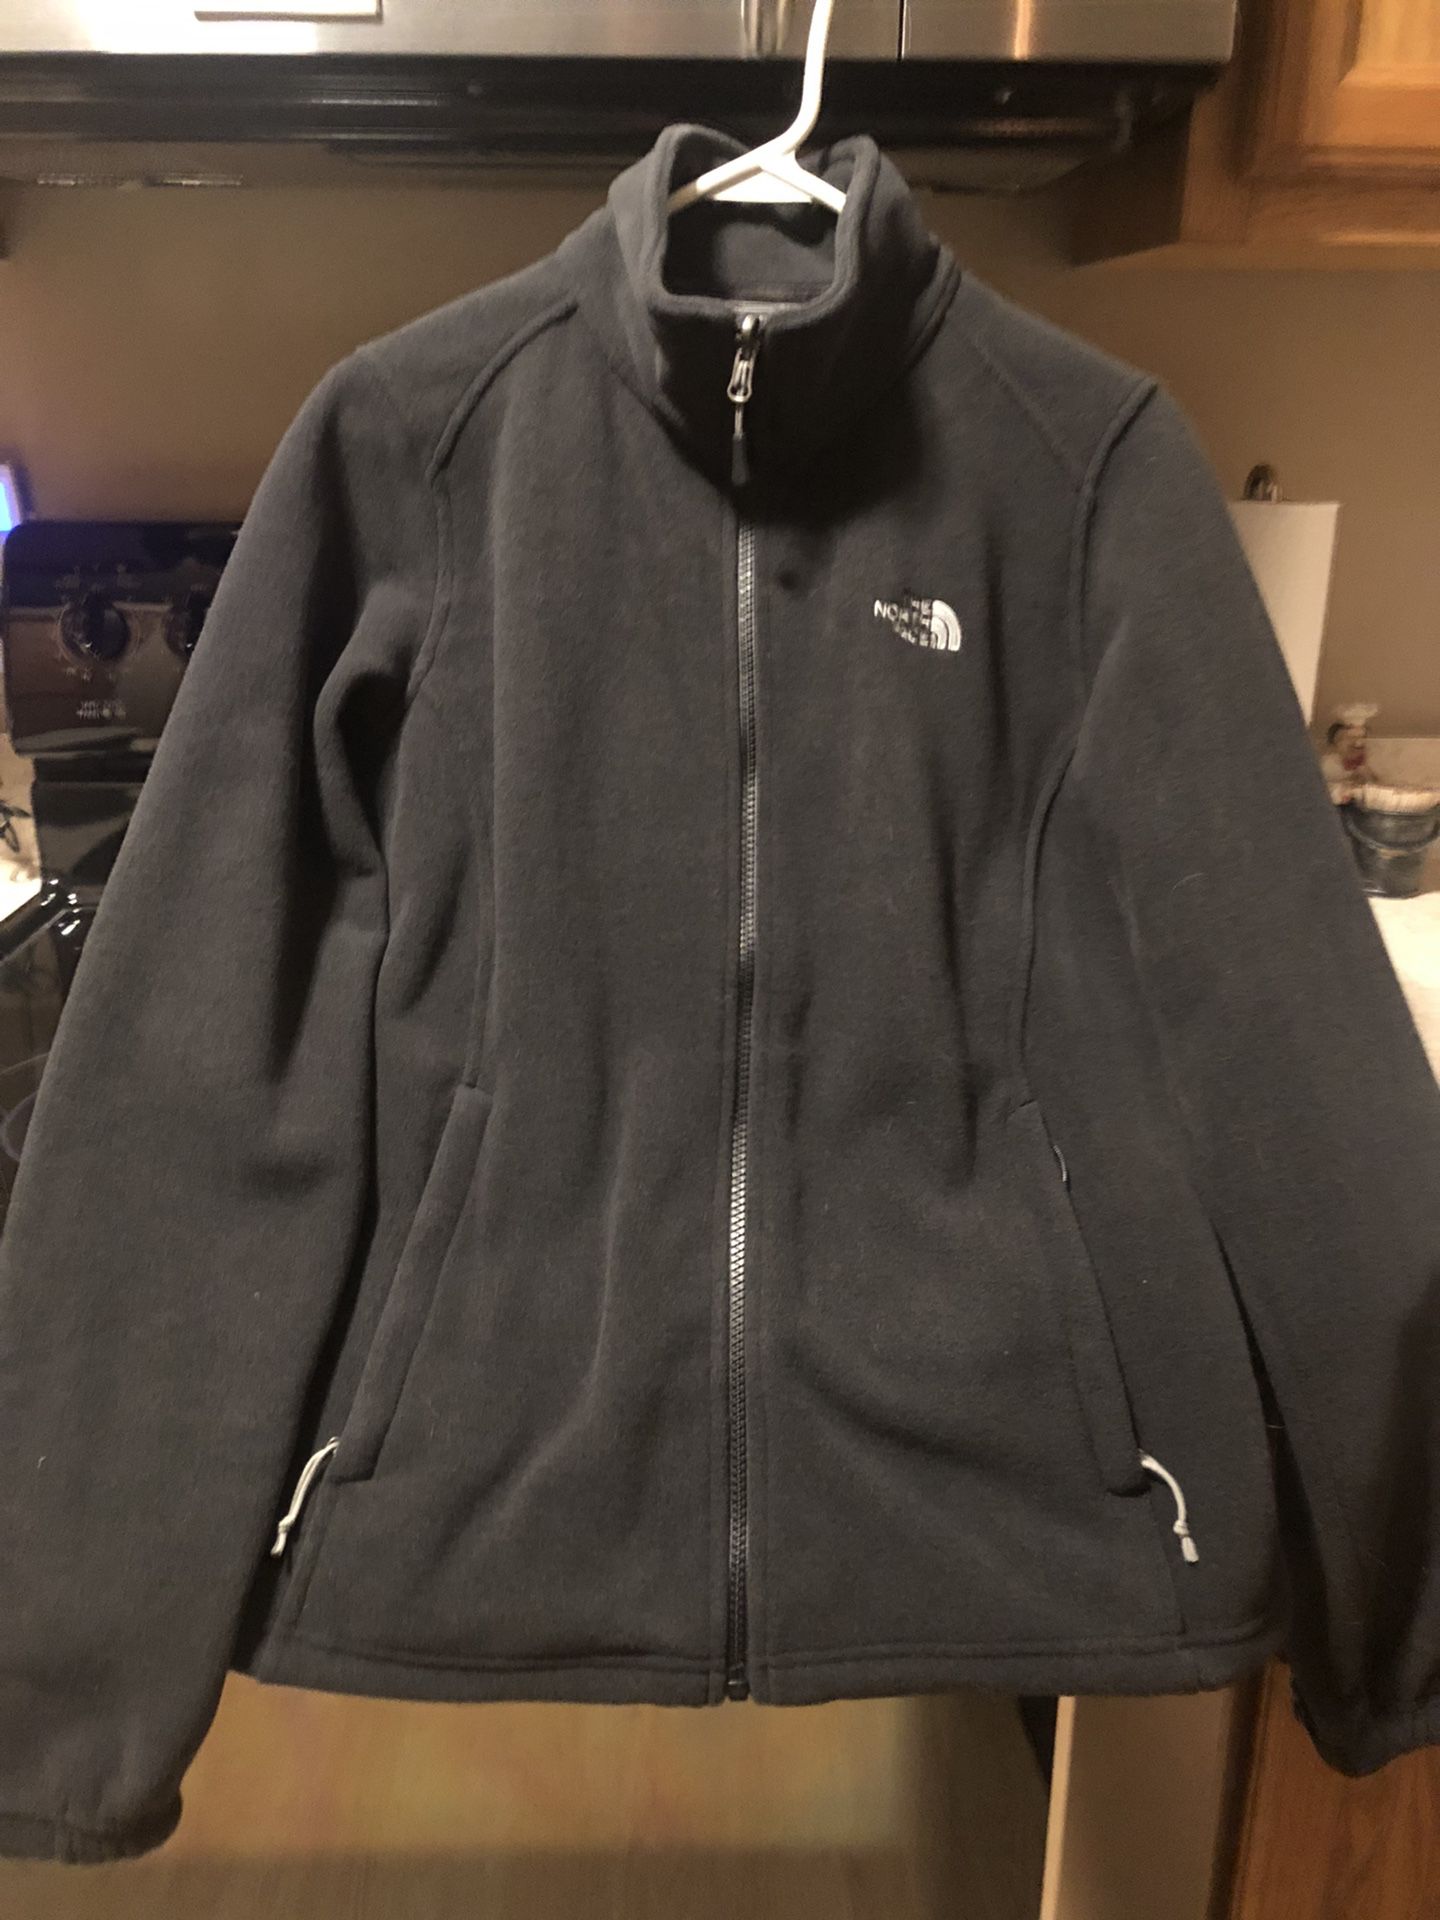 Women ‘s New North Face Jacket Size M